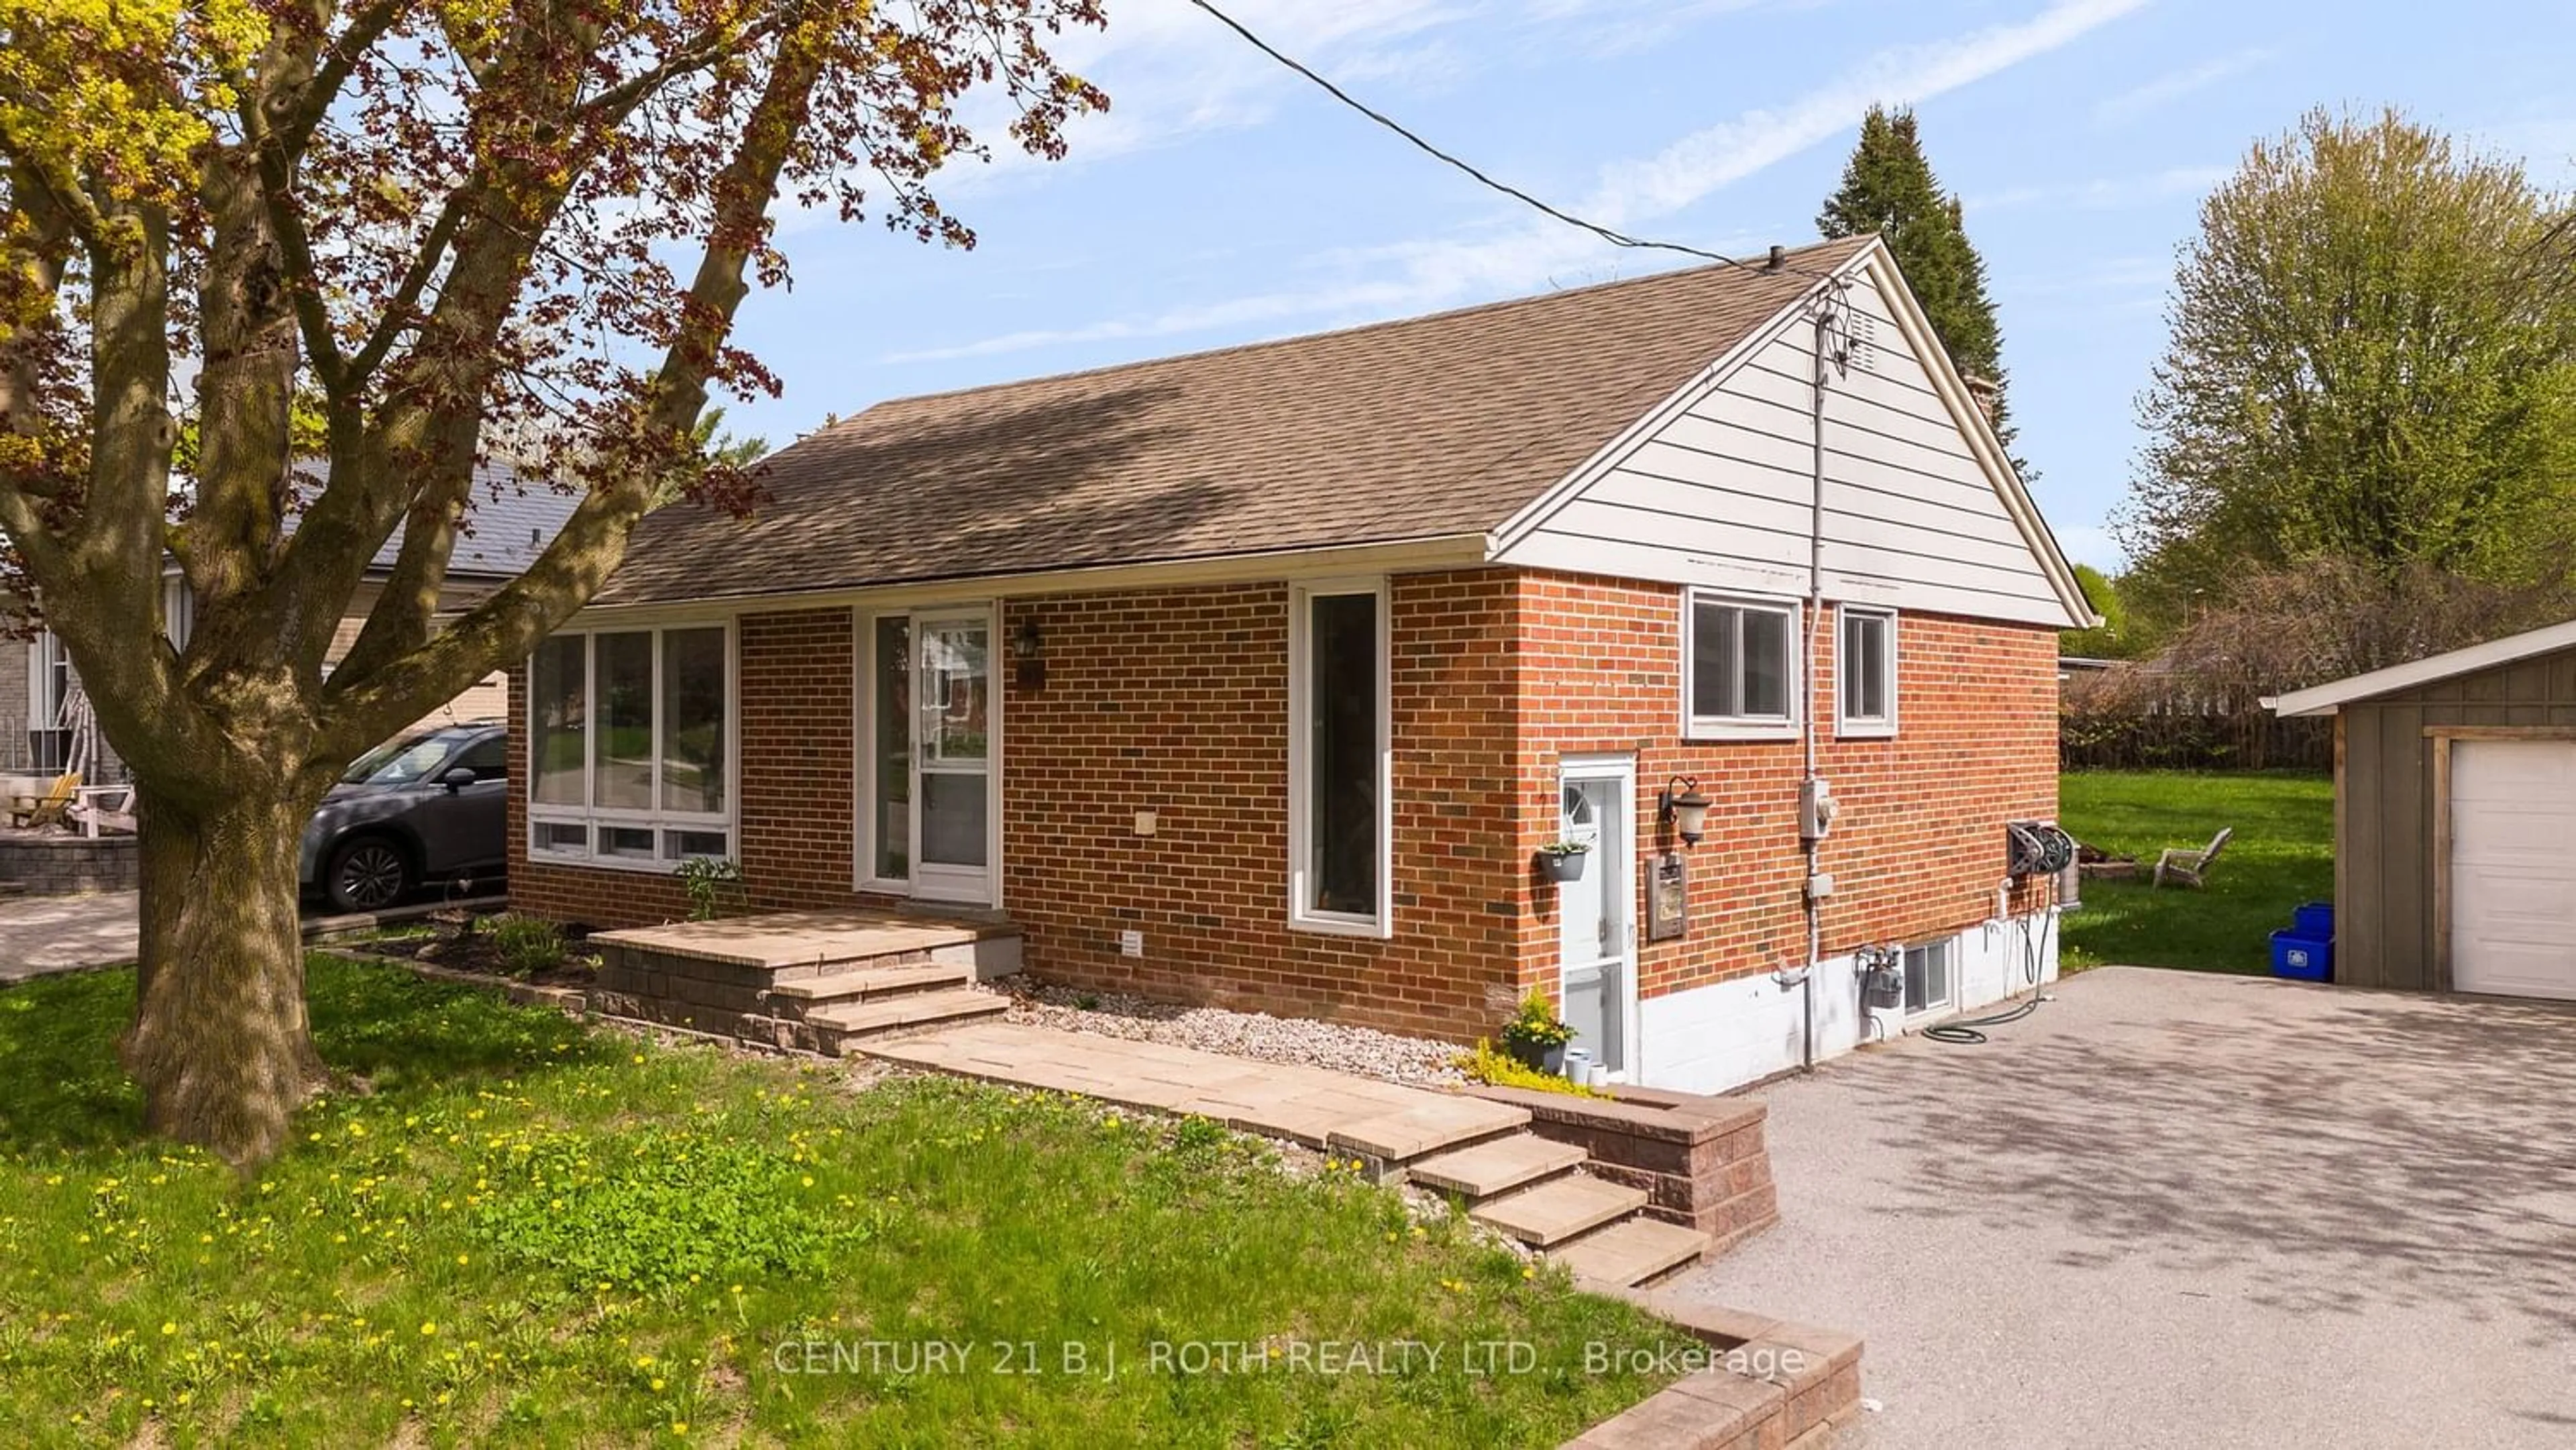 Home with brick exterior material for 243 Wellington St, Barrie Ontario L4M 2E4